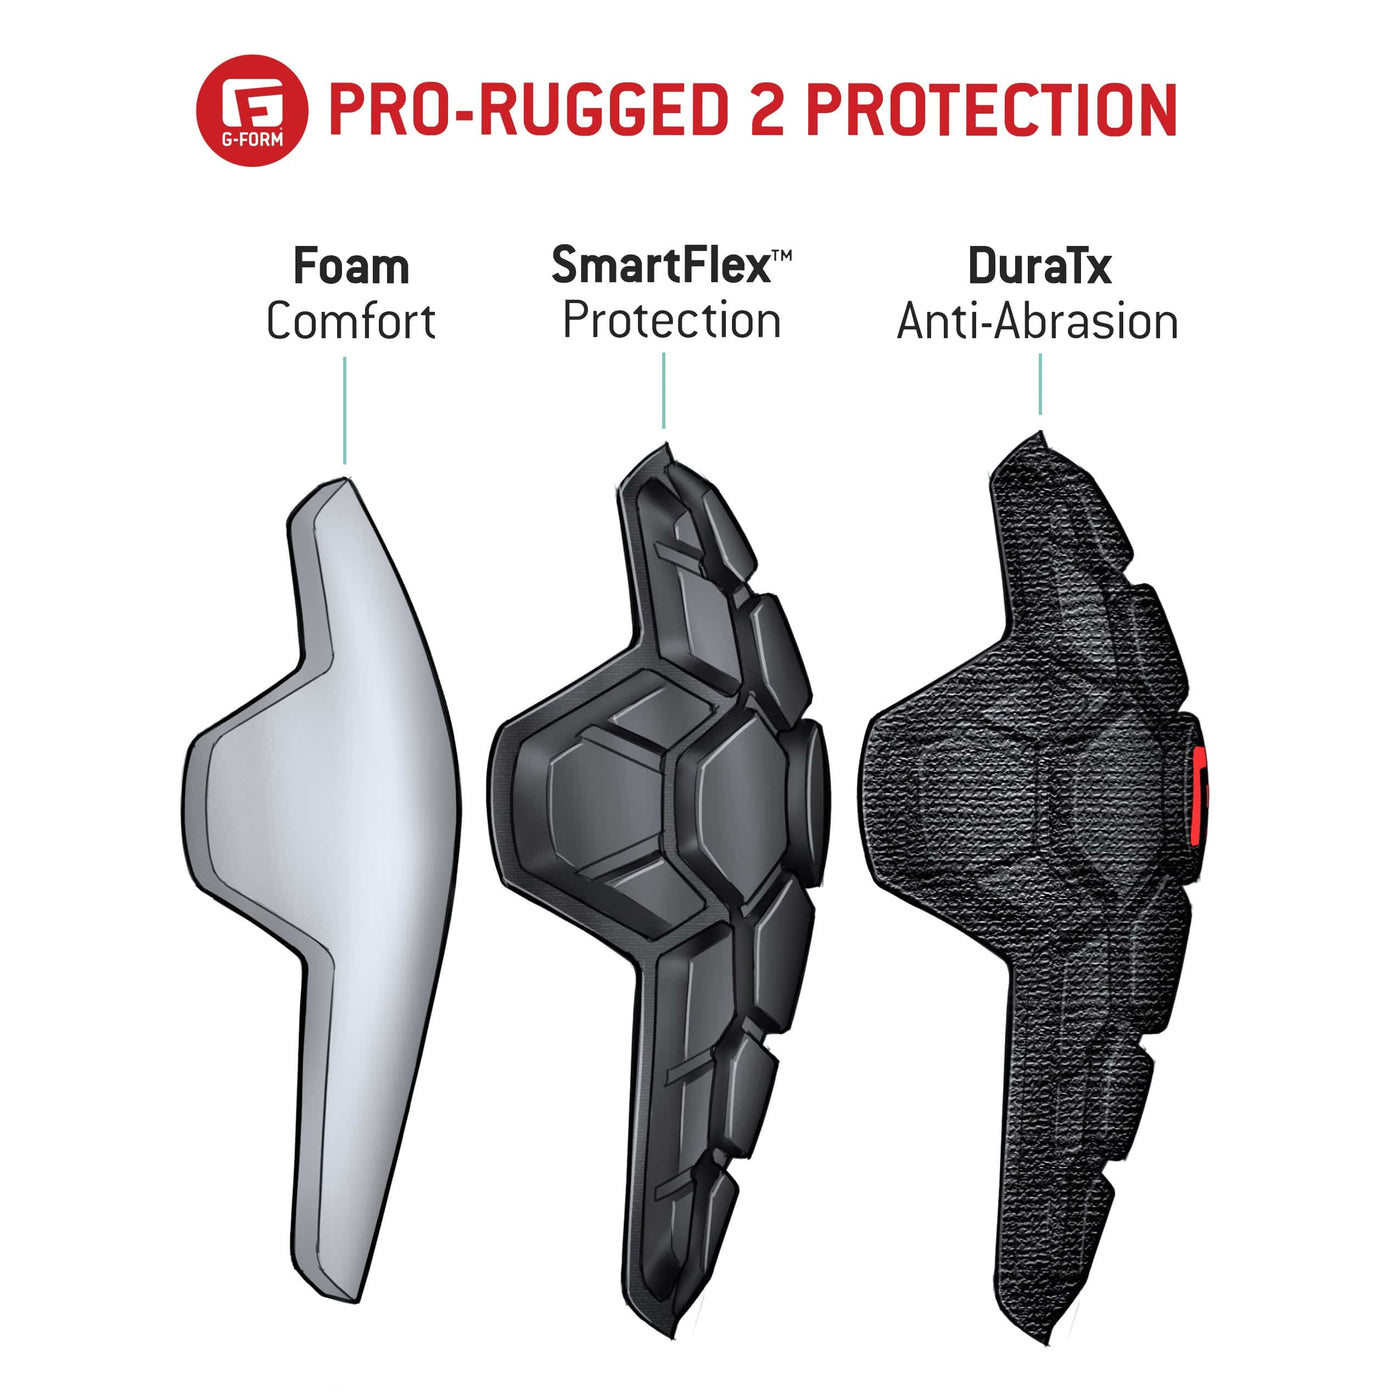 Pro-rugged 2 protection - elbow guards